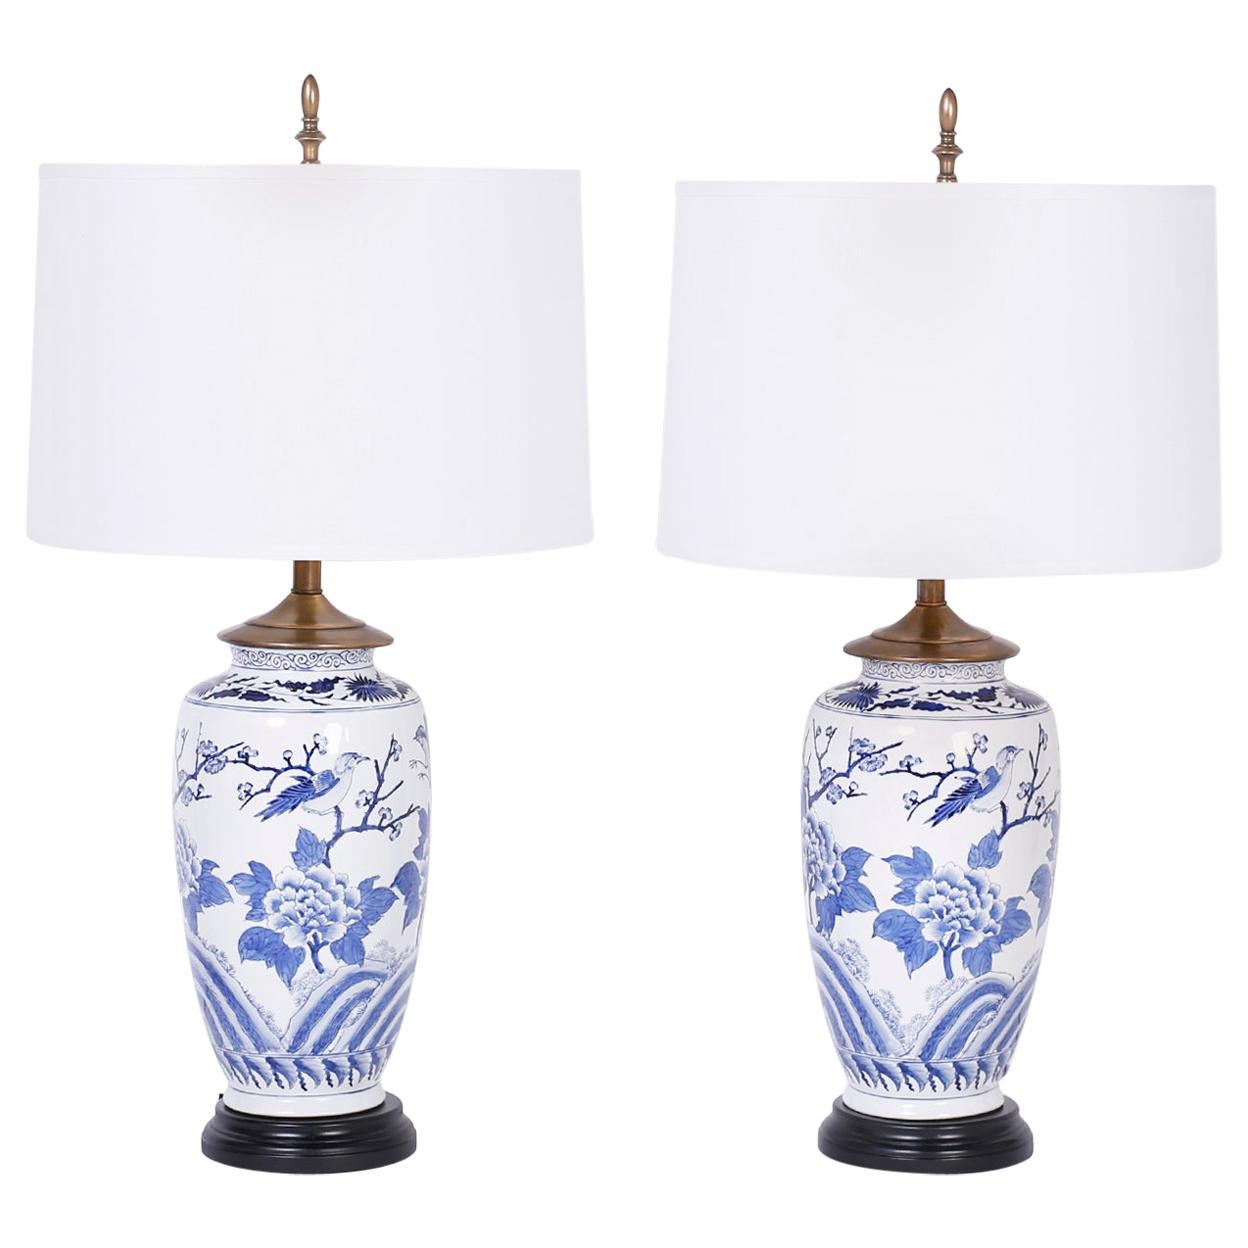 Pair of Chinese Blue and White Porcelain Table Lamps with Flowers and Birds 